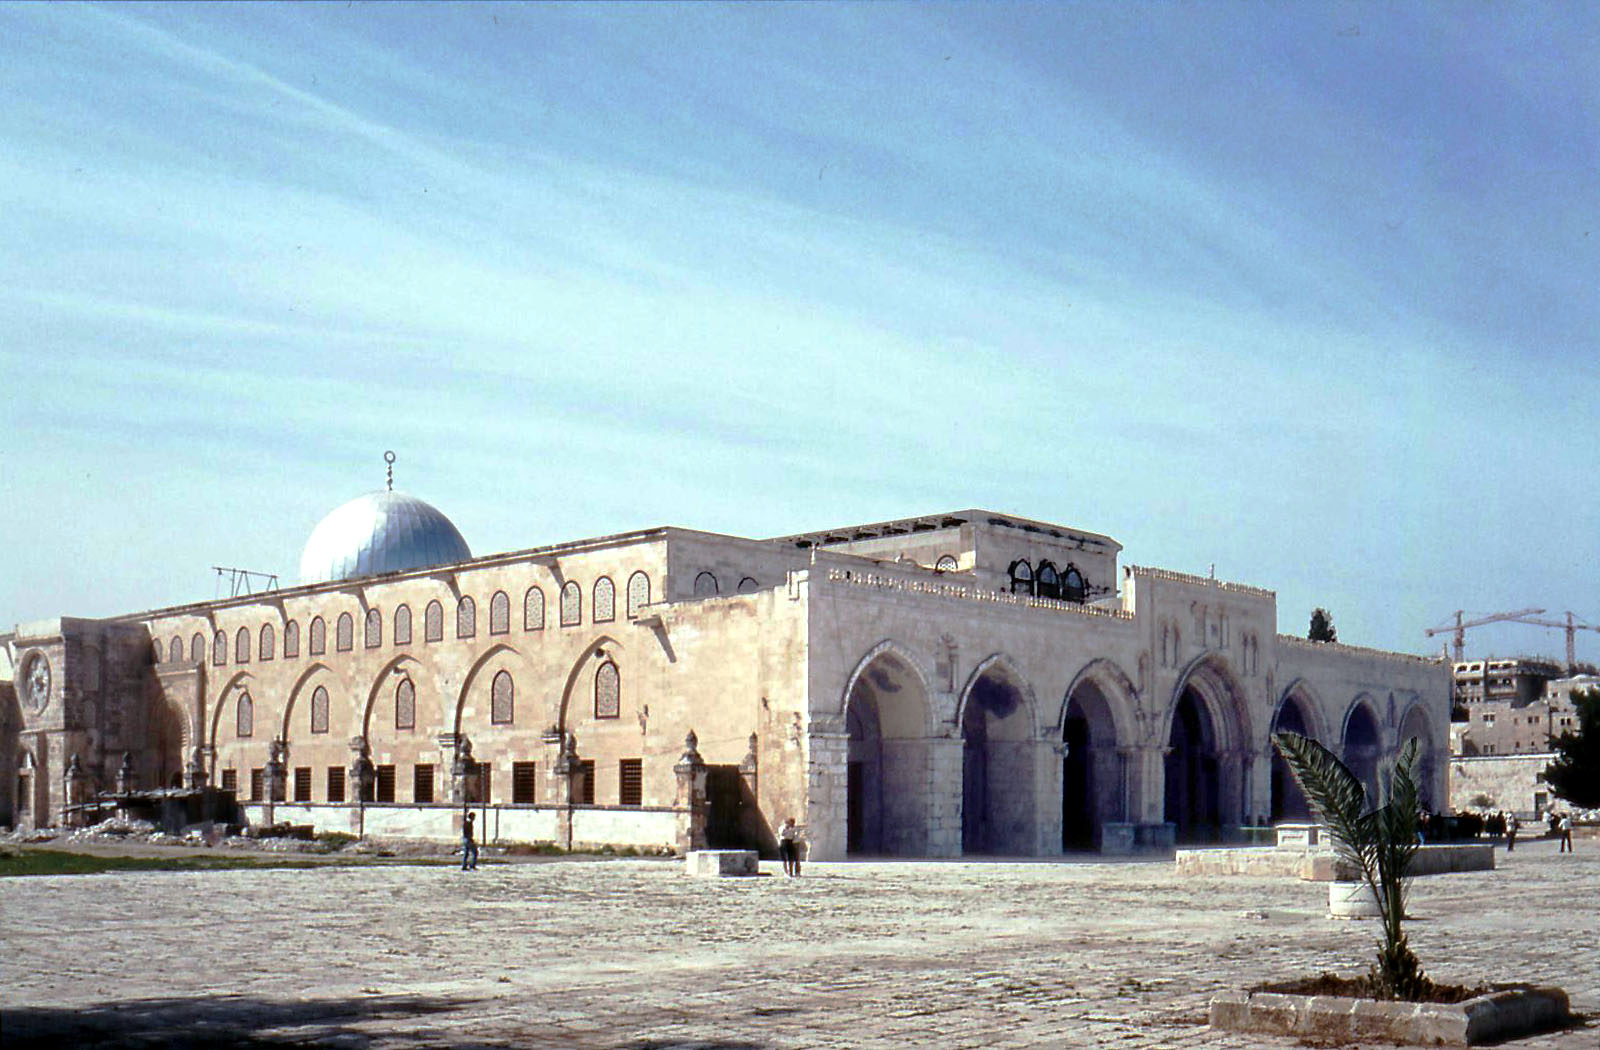 The grand mufti strongly denounced Israeli occupation troops closing down al-Aqsa Mosque in an unprecedented incident and calls upon taking immediate reaction    